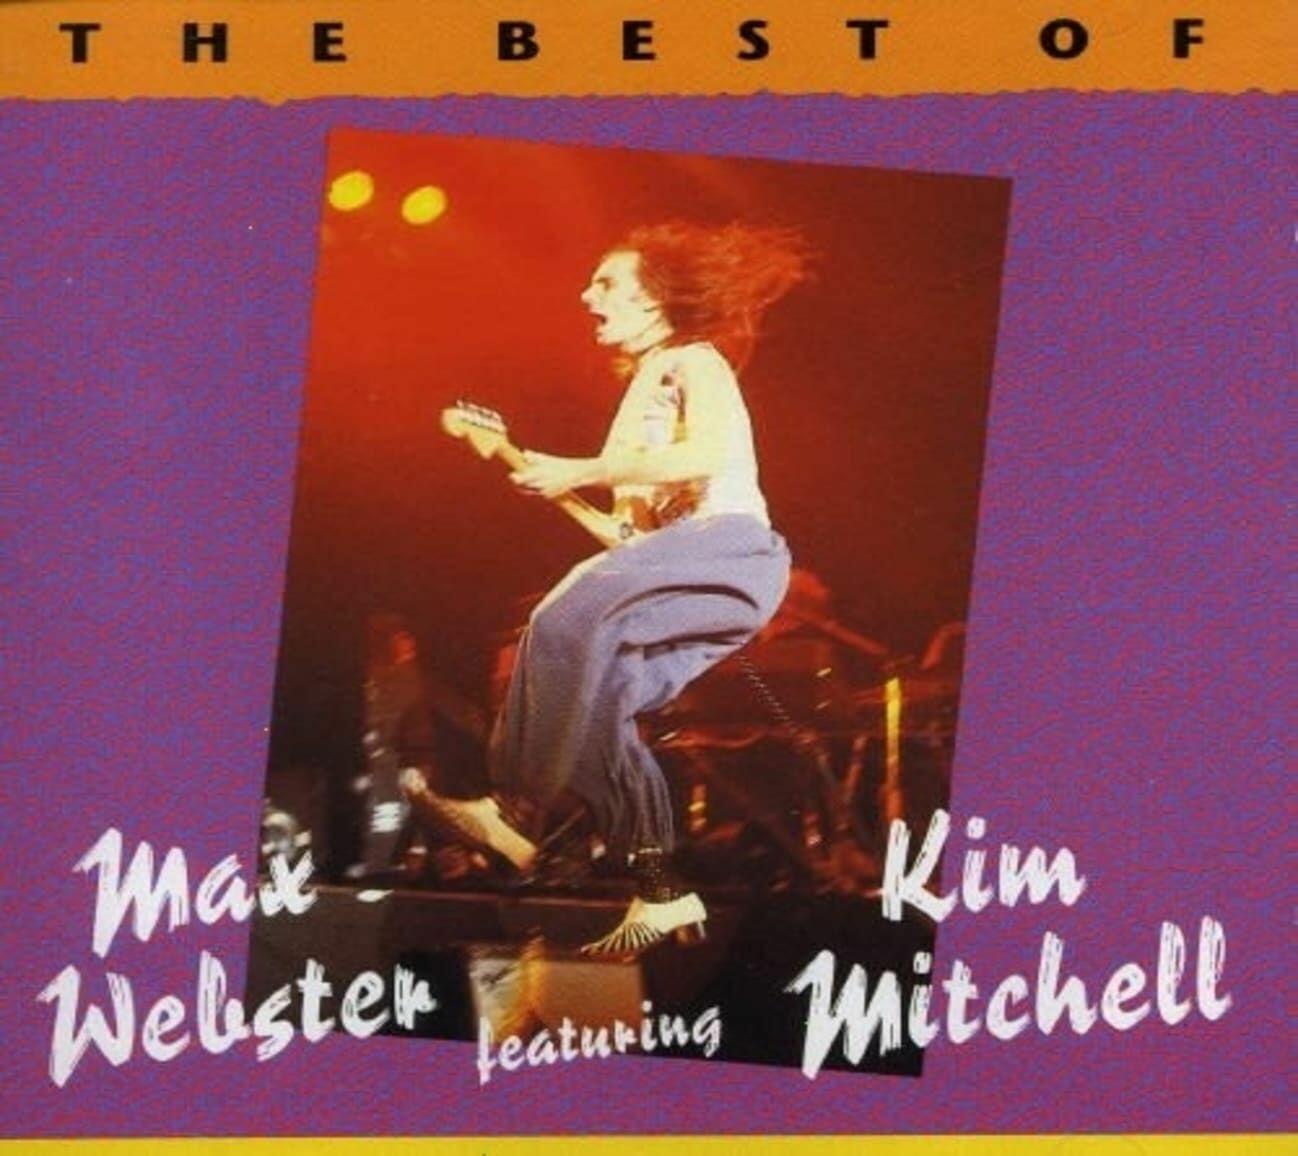 The Best Of Max Webster (CD) on MovieShack